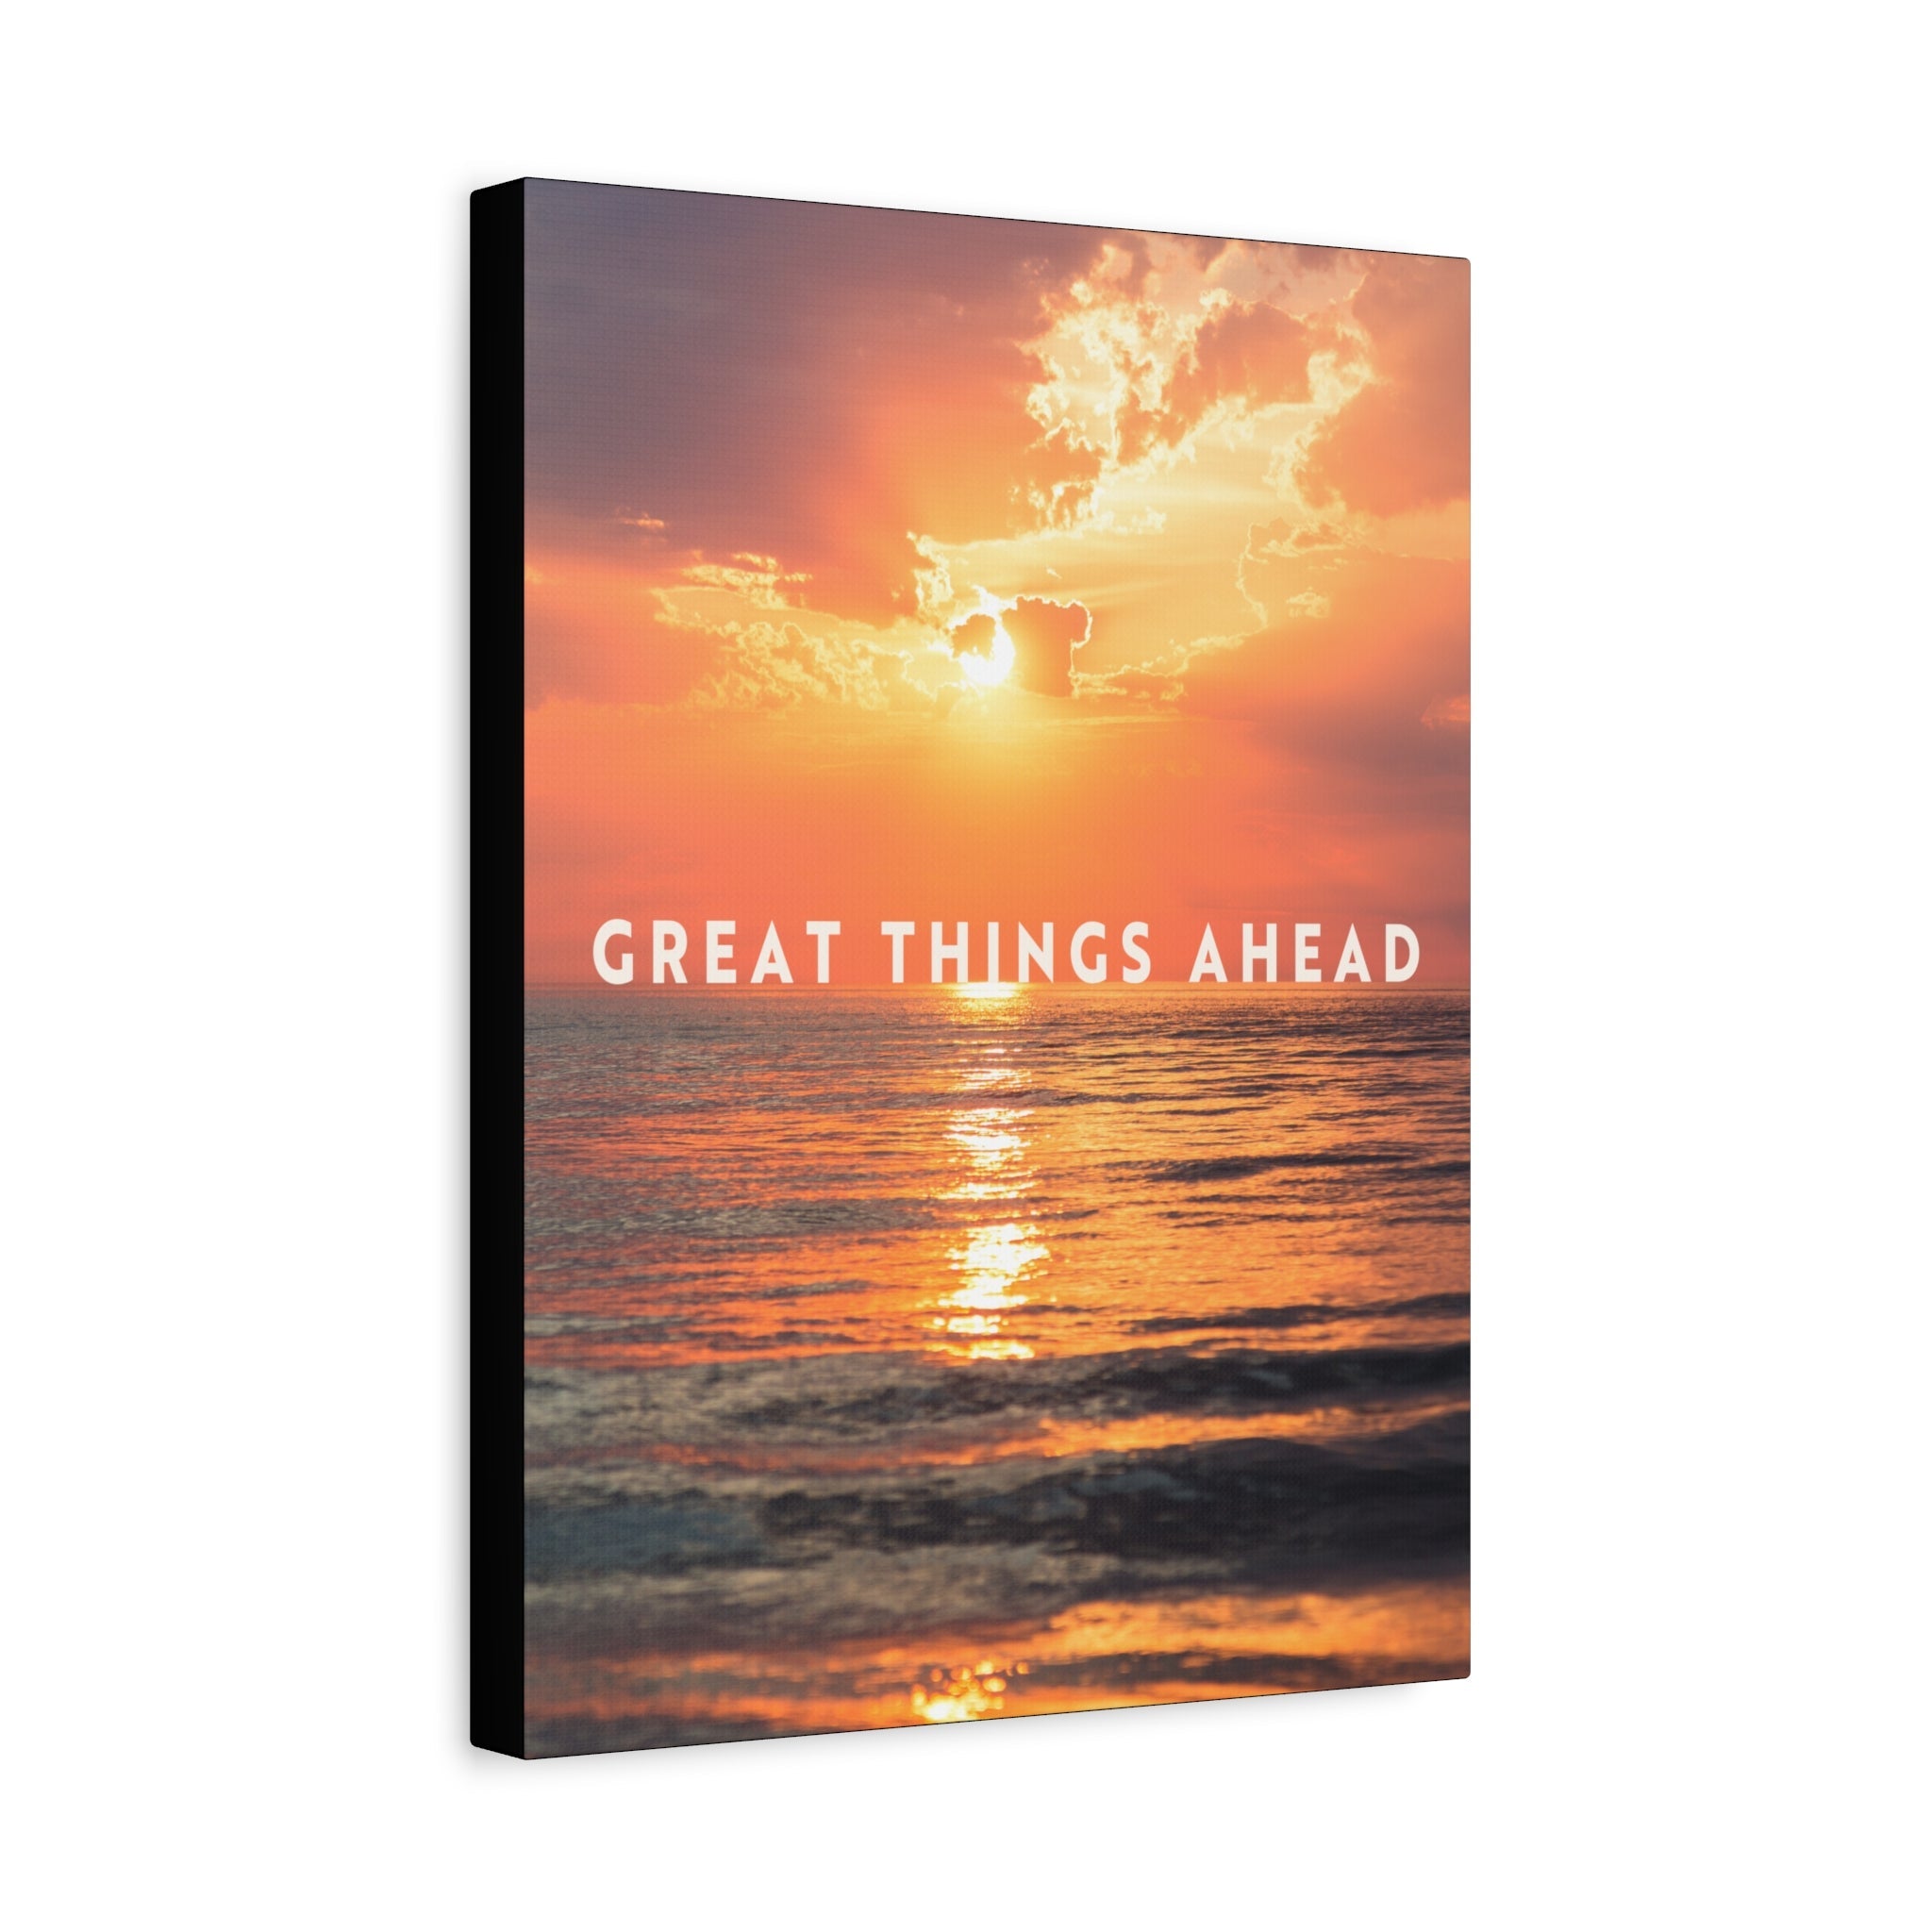 Great Things Ahead - Sunrise - Wall Art additional image 2